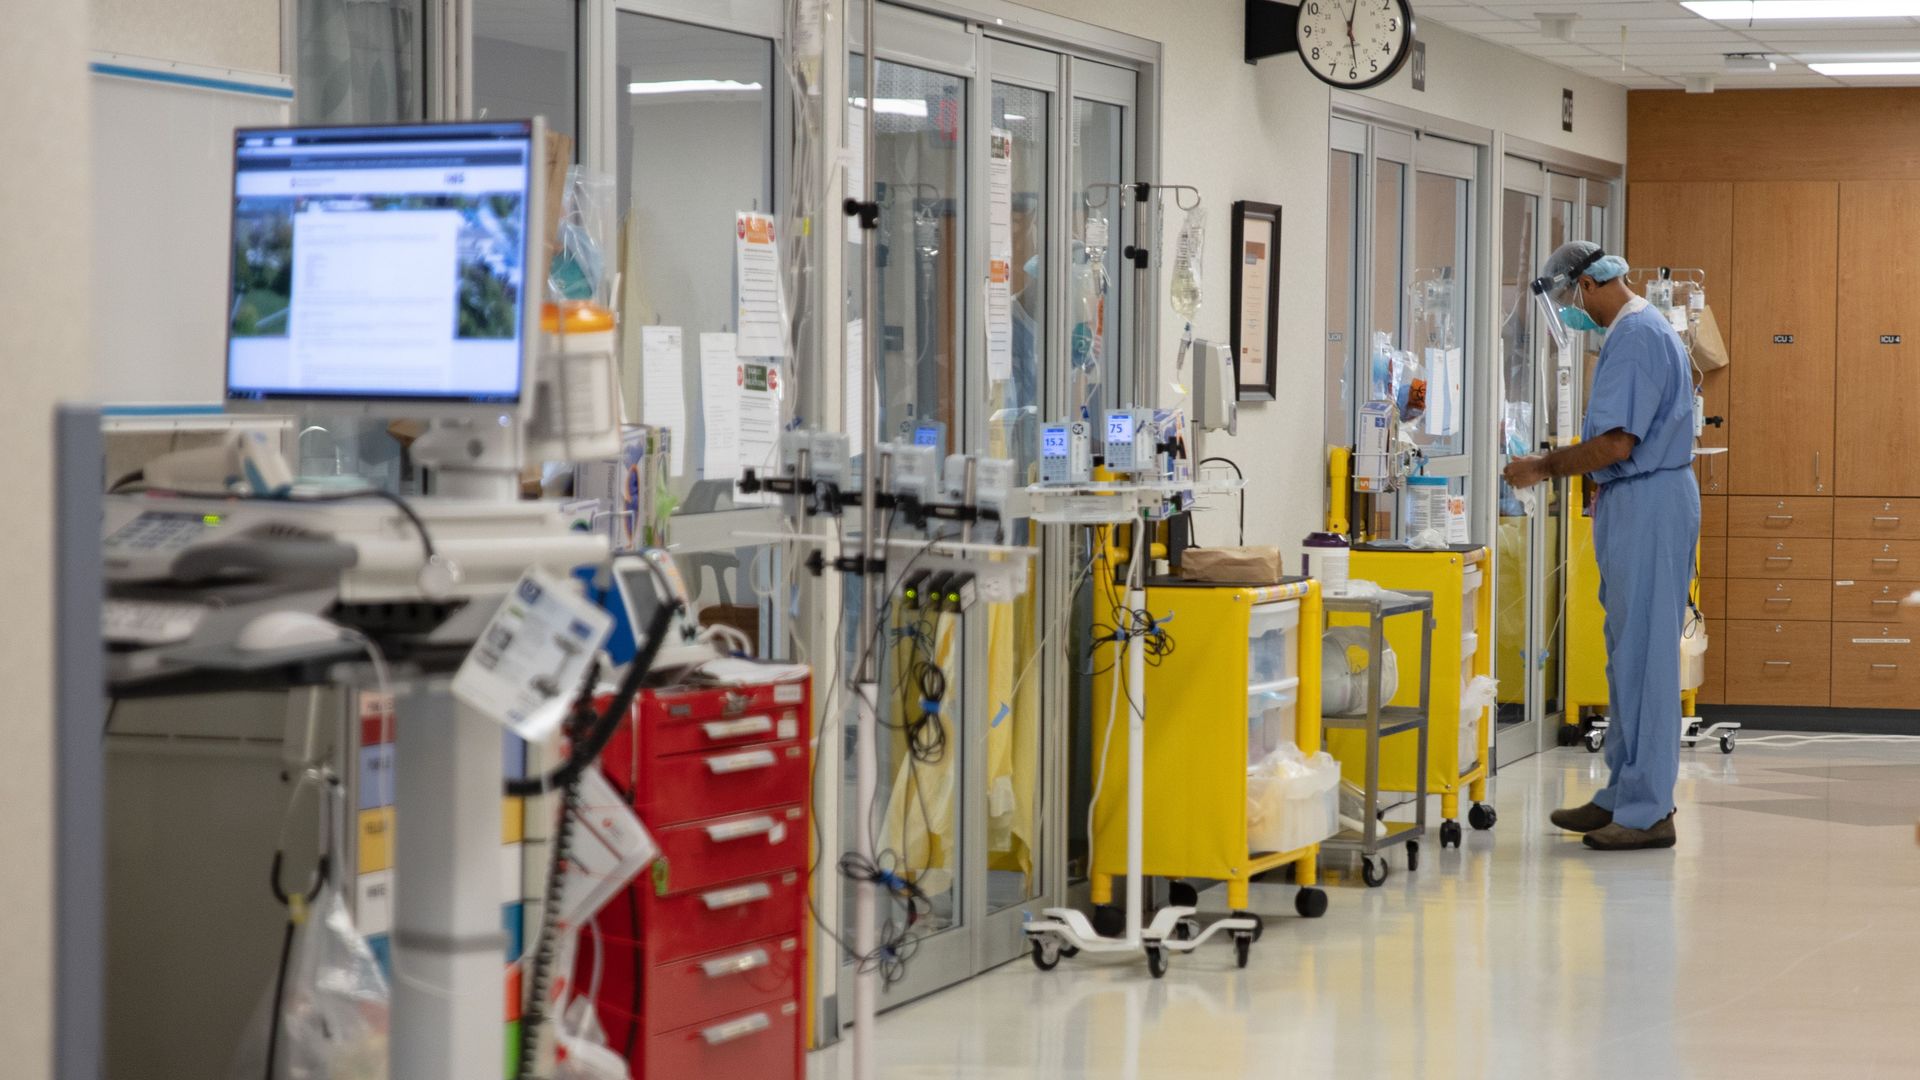 Photo of a health care worker standing outside an ICU room in a hospital ward